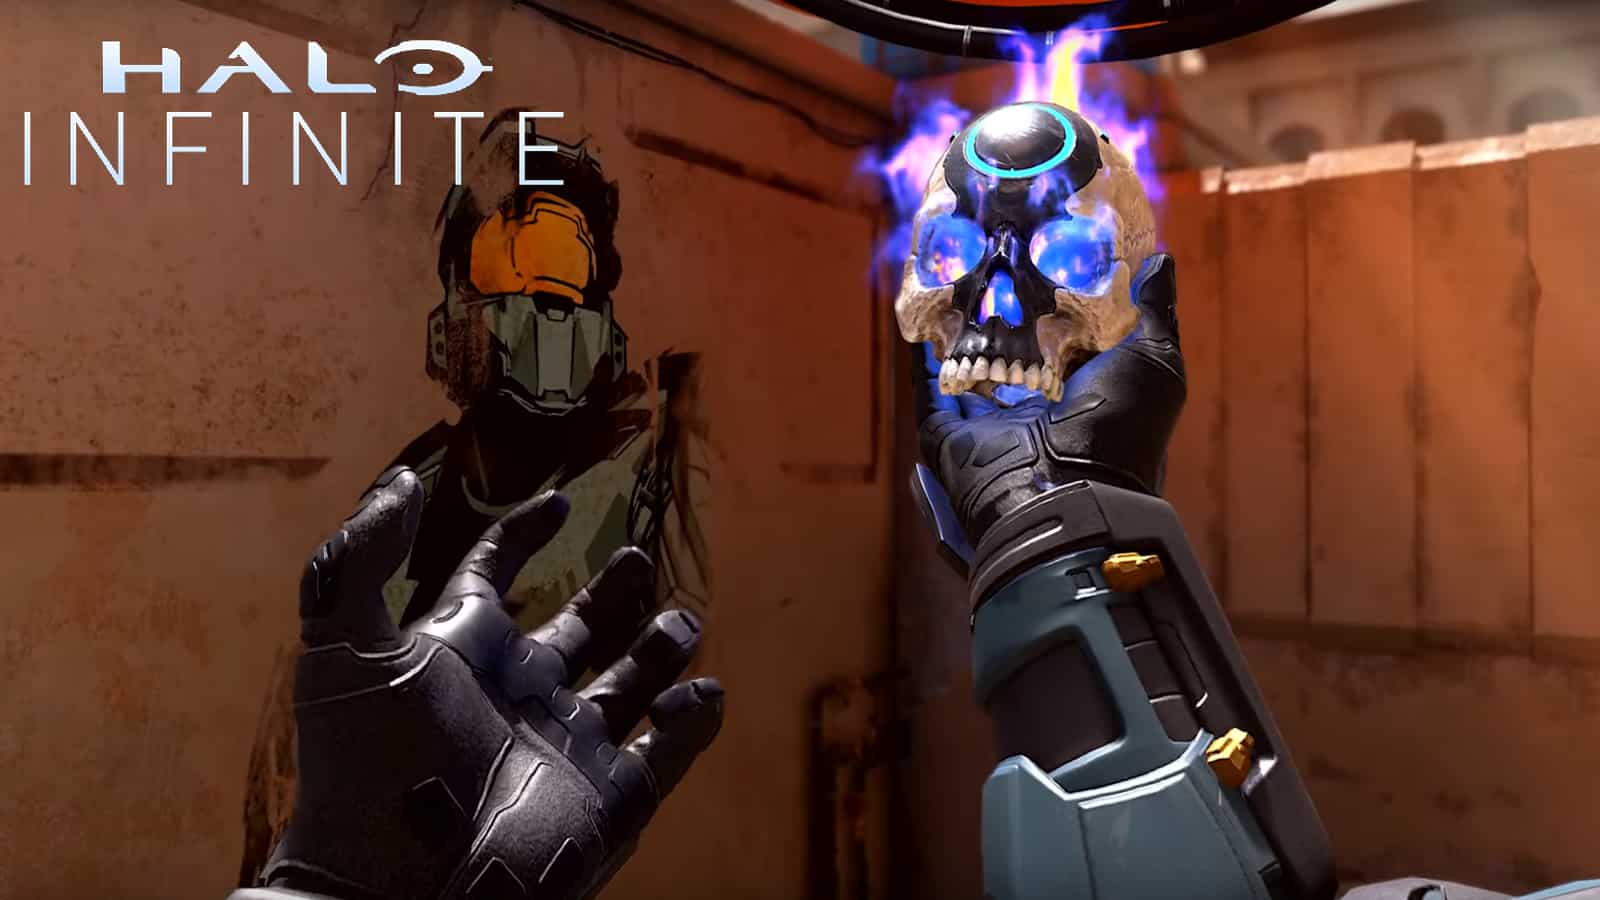 Halo Infinite spartan carrying the Oddball and holding in a pose similar to Shakespeare's Hamlet